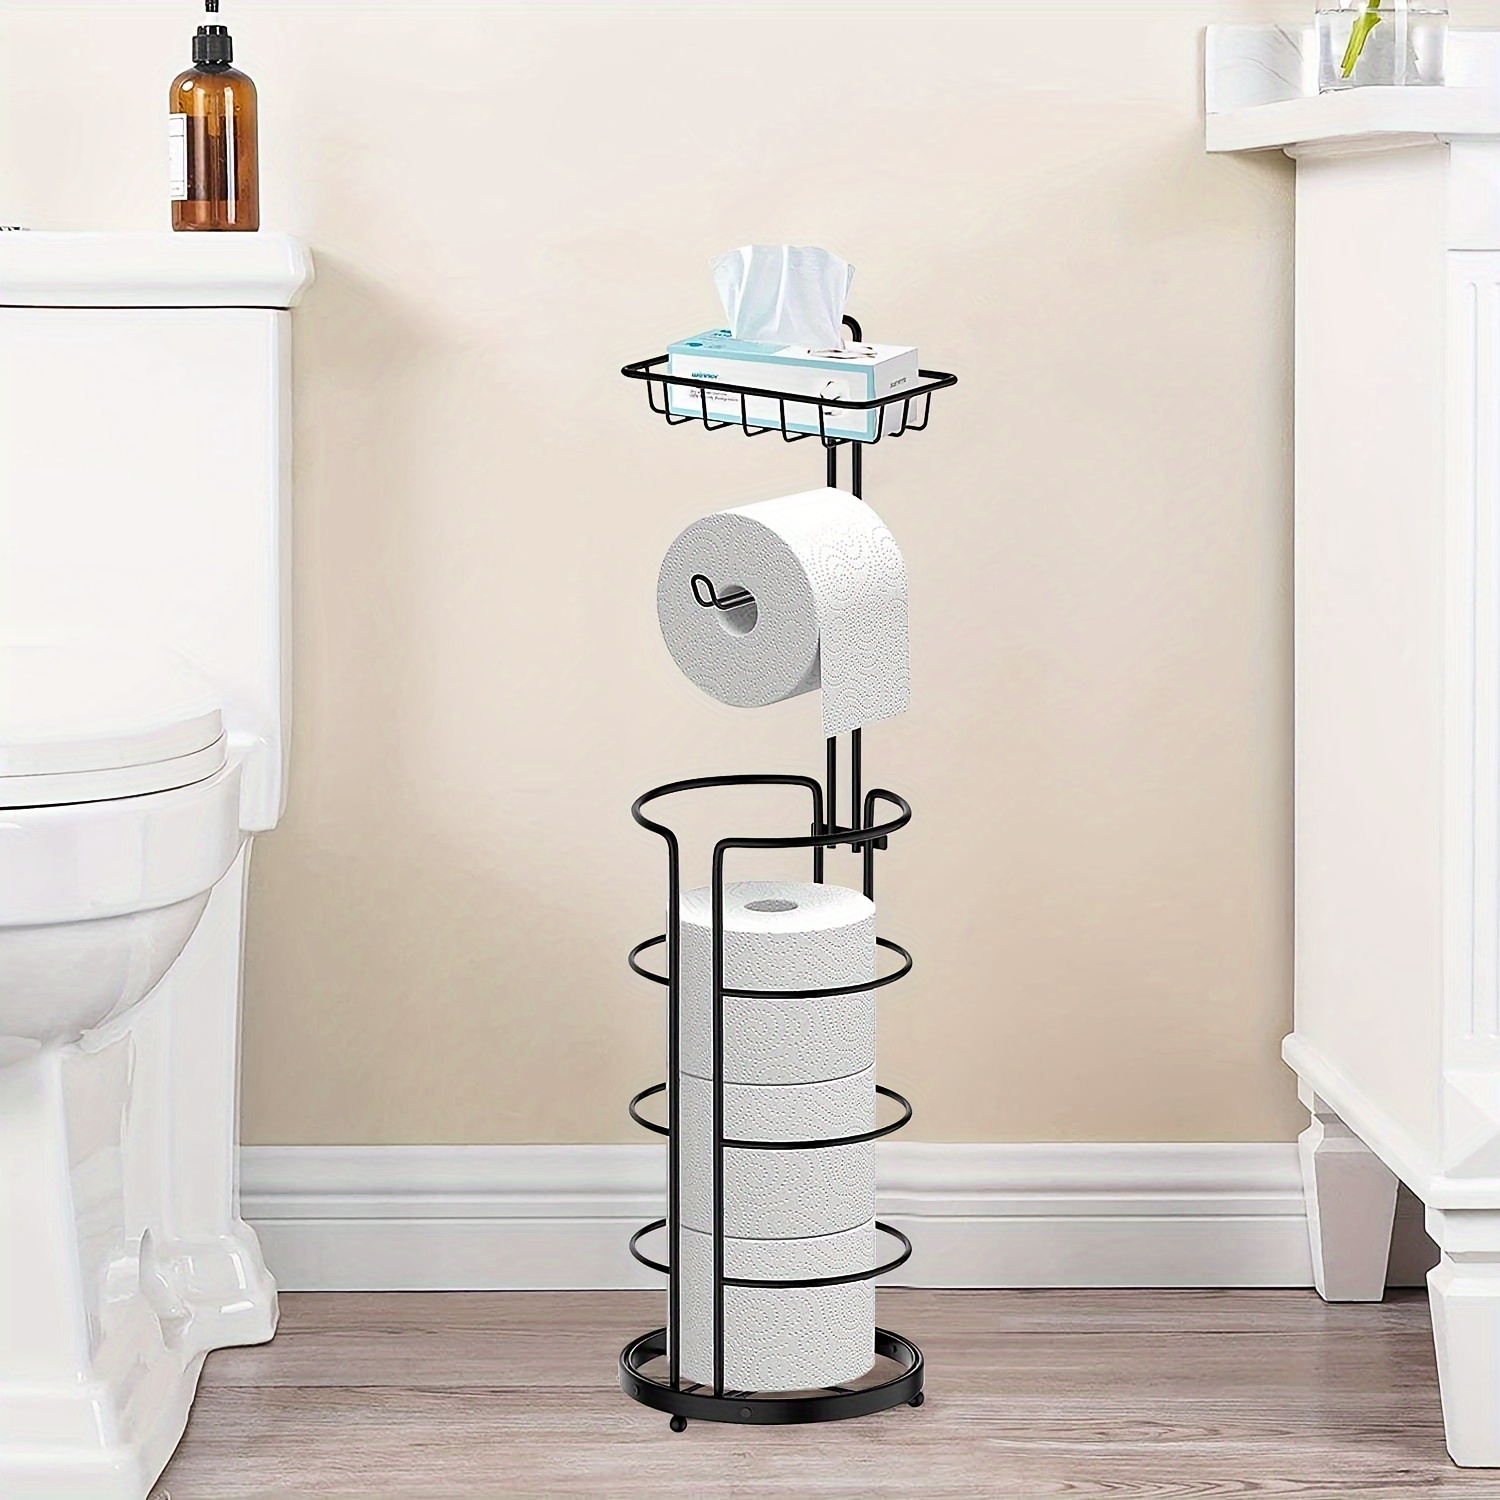 

Toilet Paper Holder Stand With Shelf, Free Standing Toilet Tissue Roll Storage Rack For Bathroom, Black